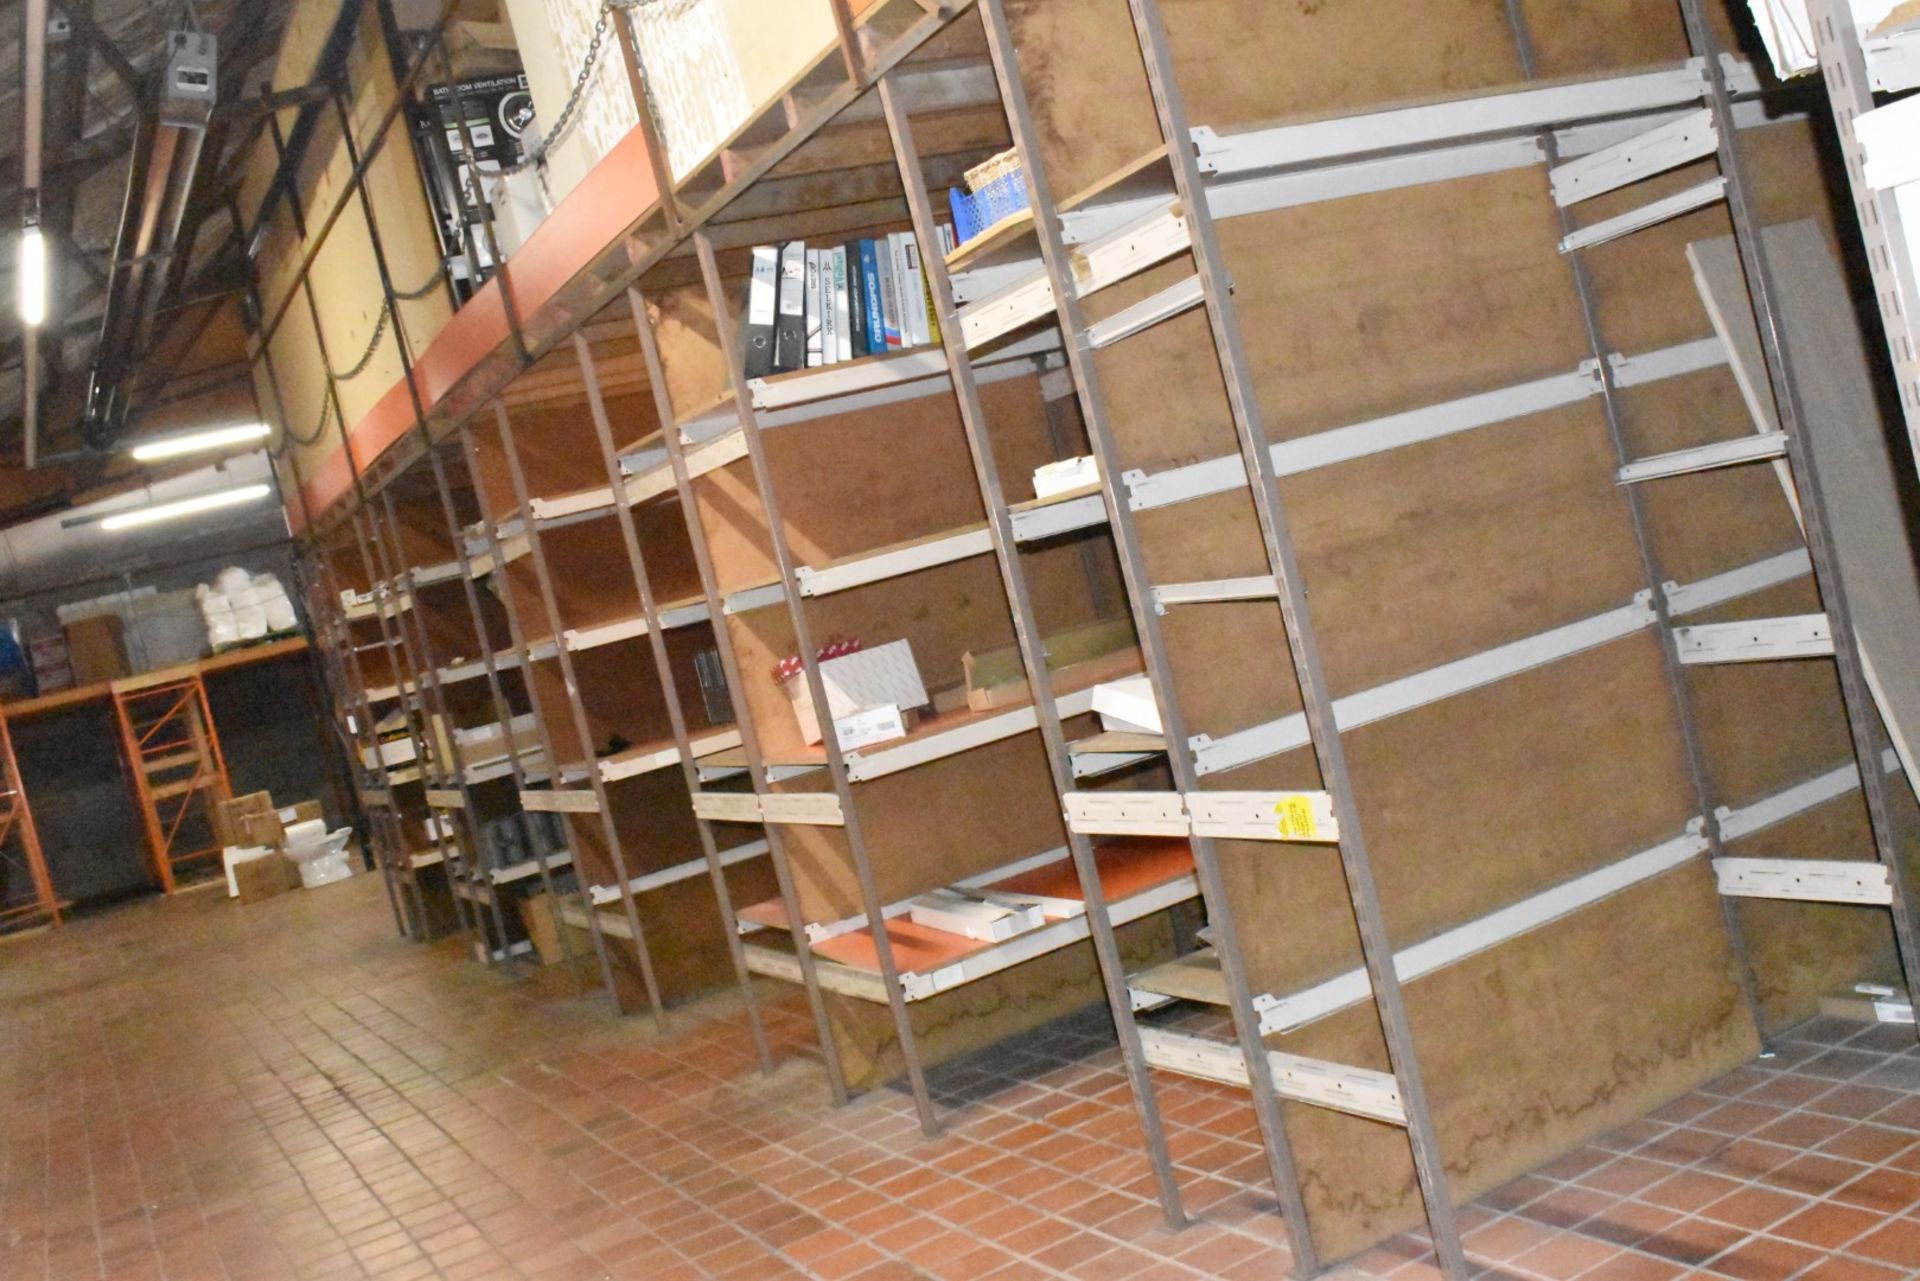 1 x Mezzanine Floor Over a Large Collection of Shelving With Timber Staircase - Size: 3m x 12m x 9m - Image 36 of 38